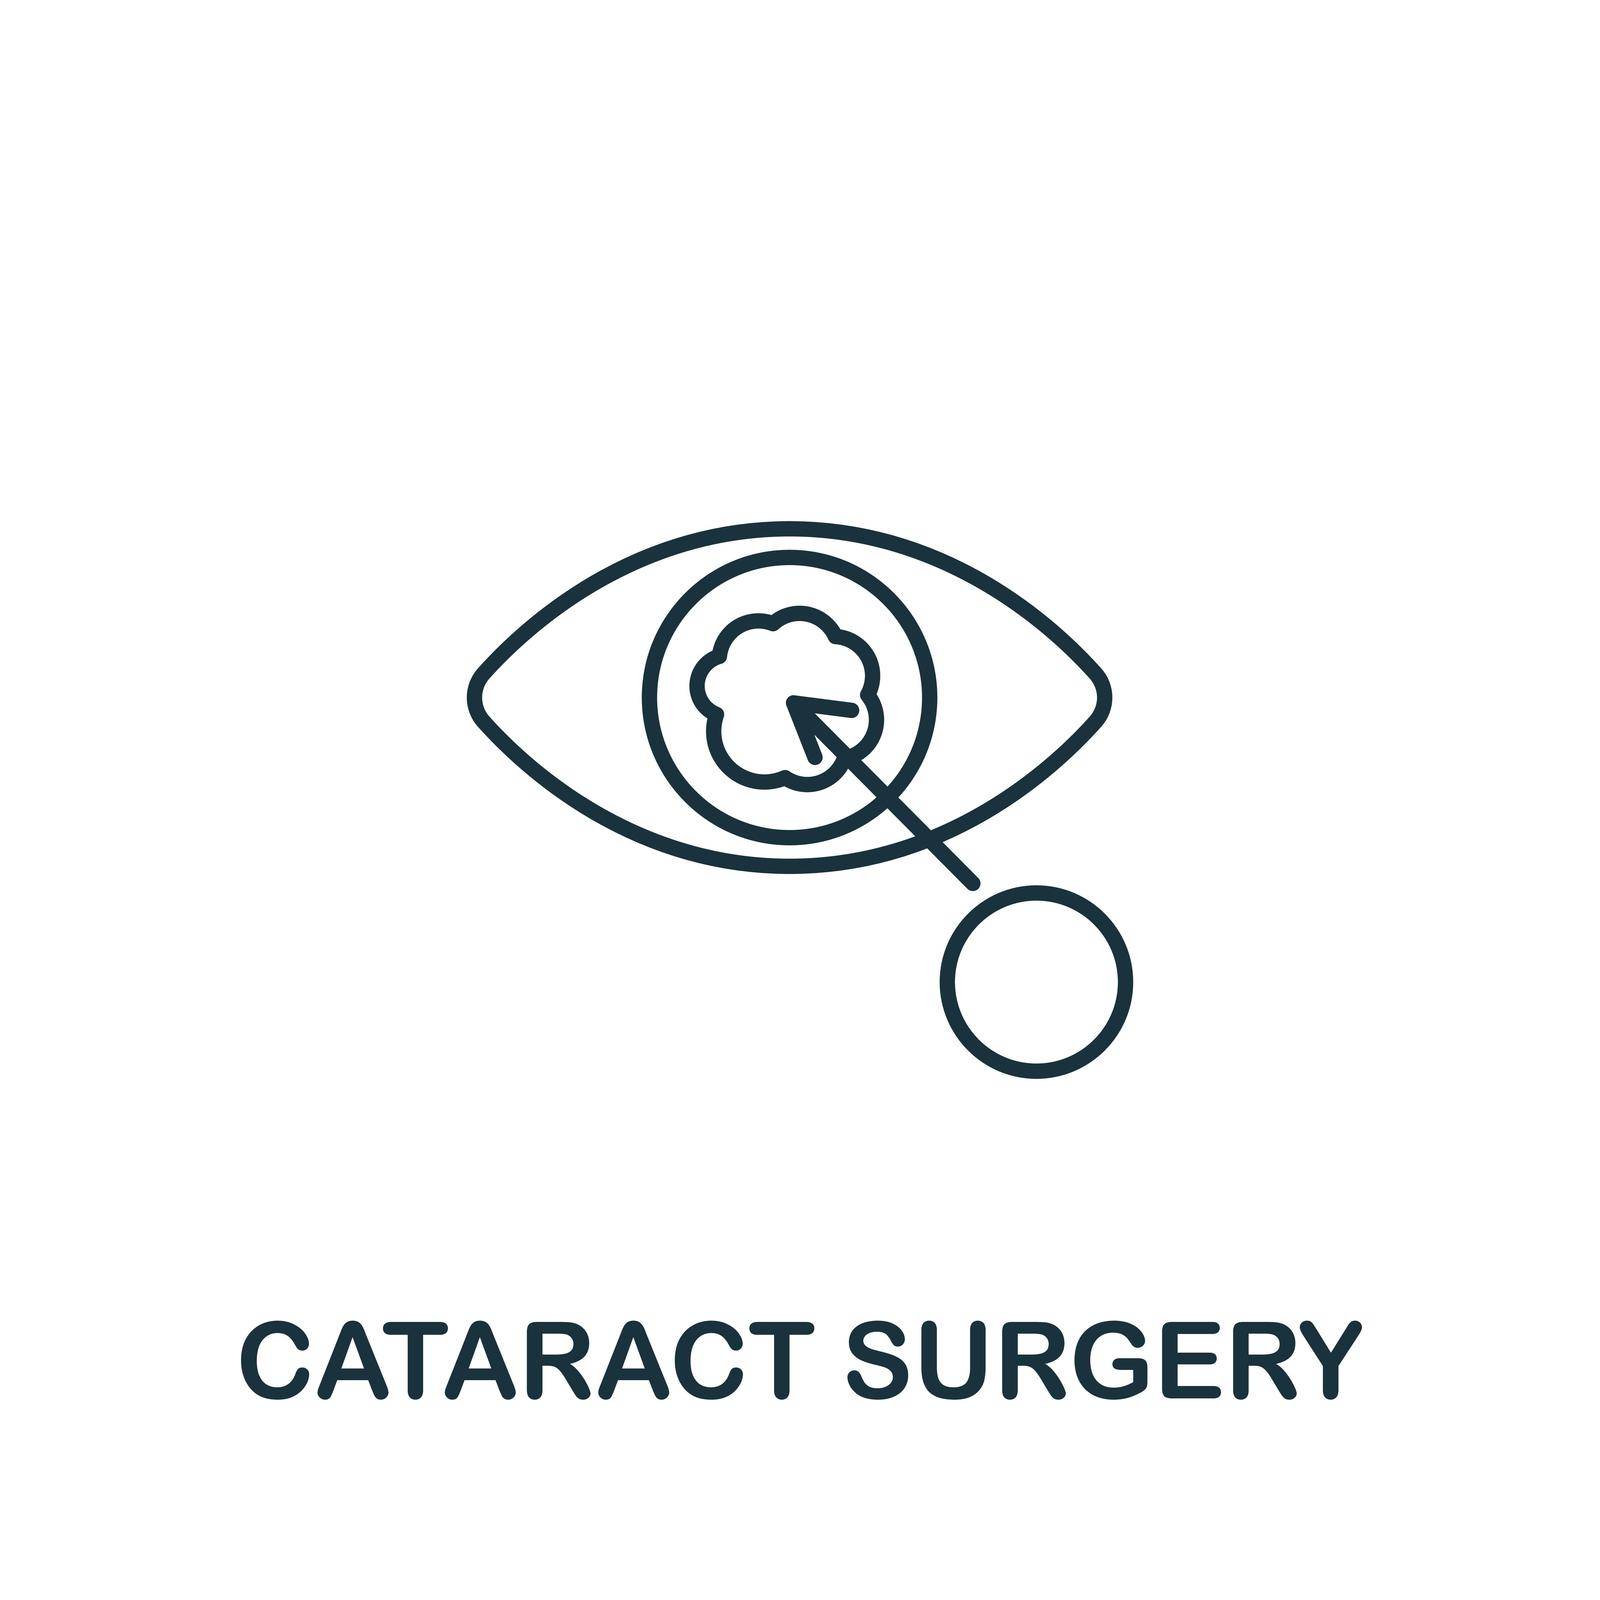 Cataract Surgery icon. Simple line element symbol for templates, web design and infographics.